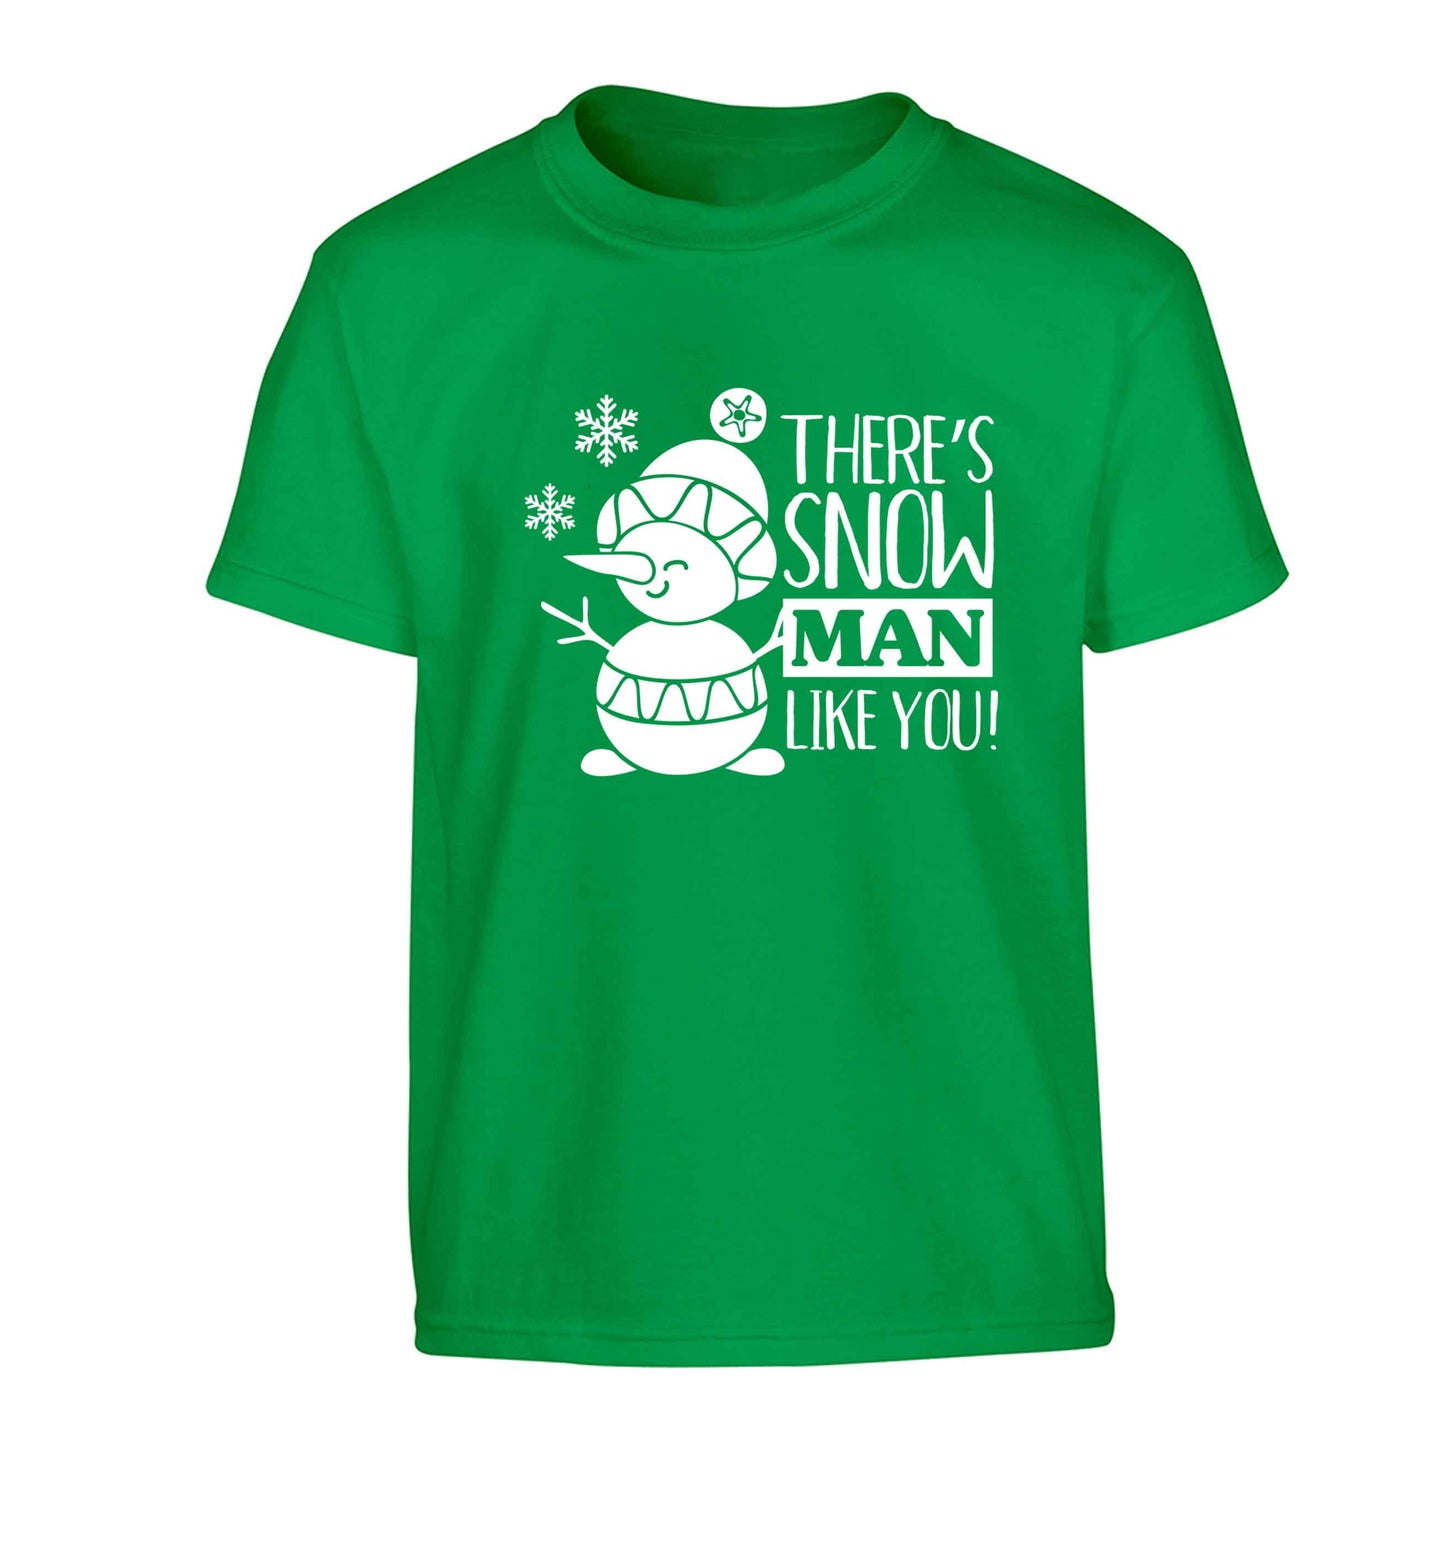 There's snow man like you Children's green Tshirt 12-13 Years